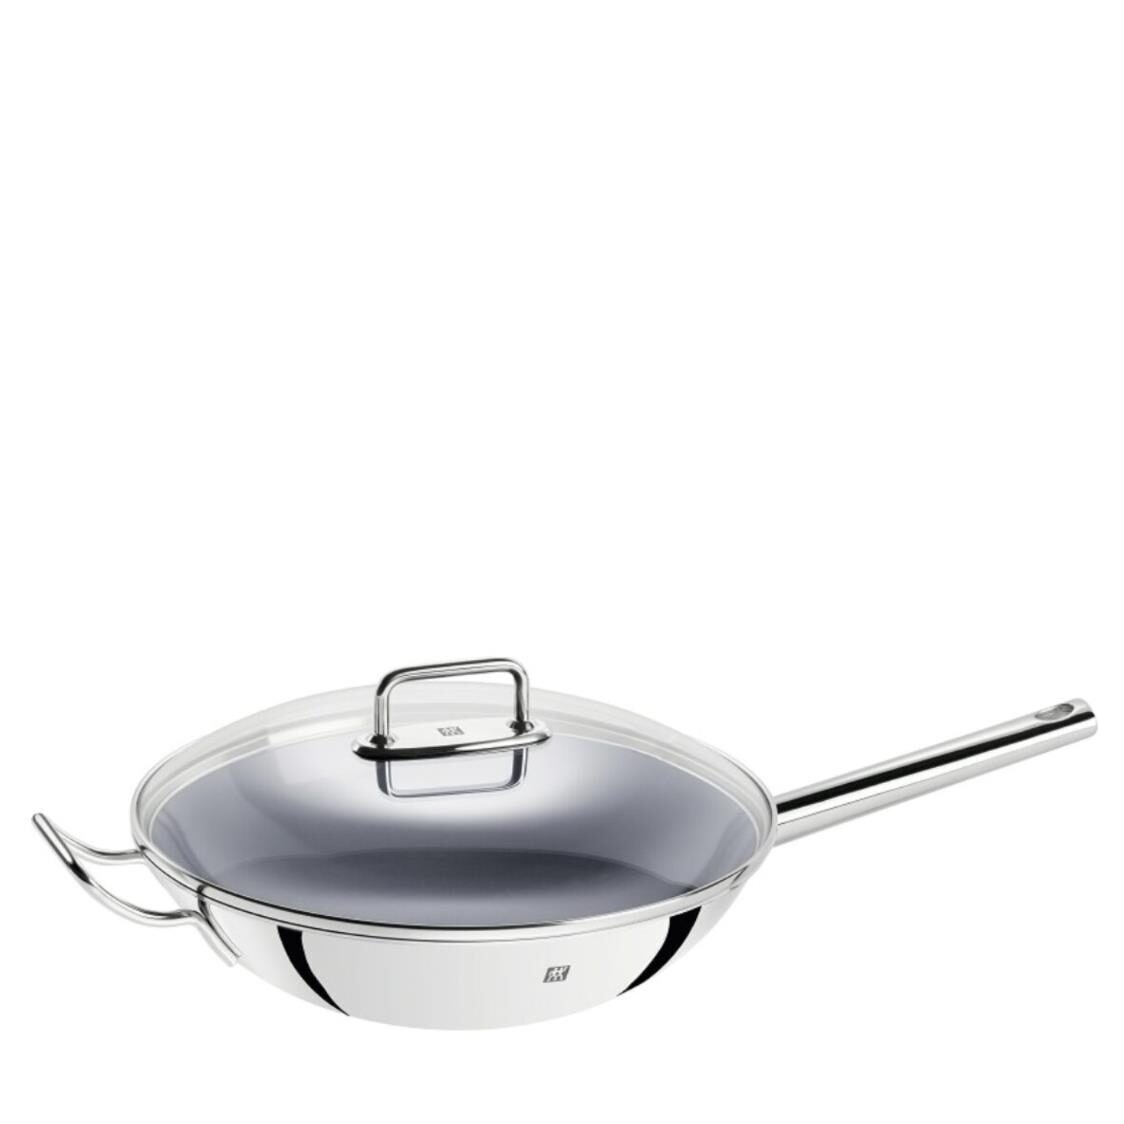 Zwilling Plus Stainless Steel Wok With Ceramic Non Stick Coating - 32 cm With Glass Lid 40992-032